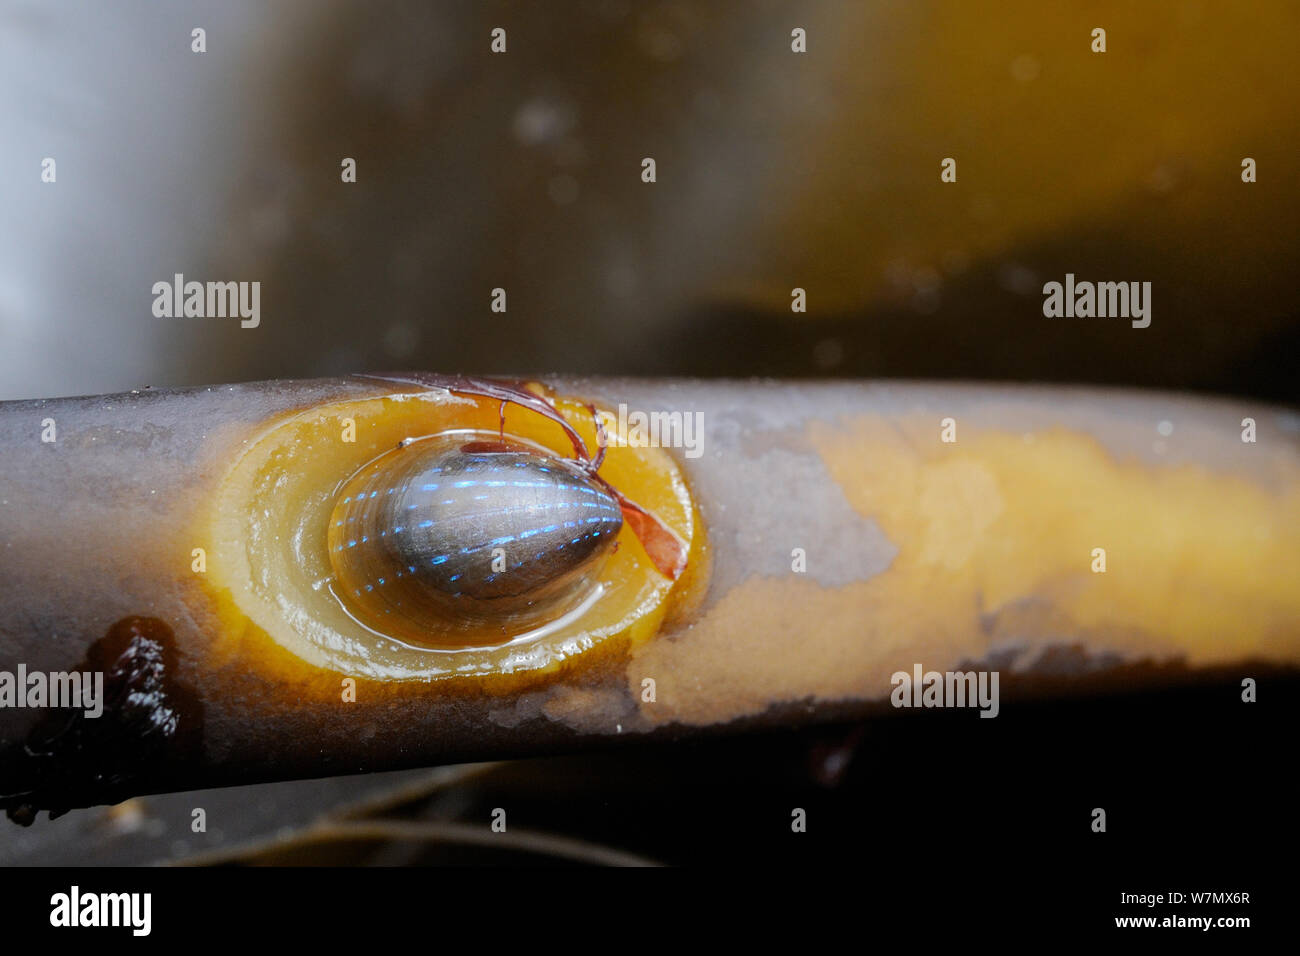 Blue rayed limpet (Patina pellucida) in depression on Oarweed / Cuvie / Forest / Common kelp (Laminaria hyperborea) stem, Crail, Scotland, UK, July Stock Photo